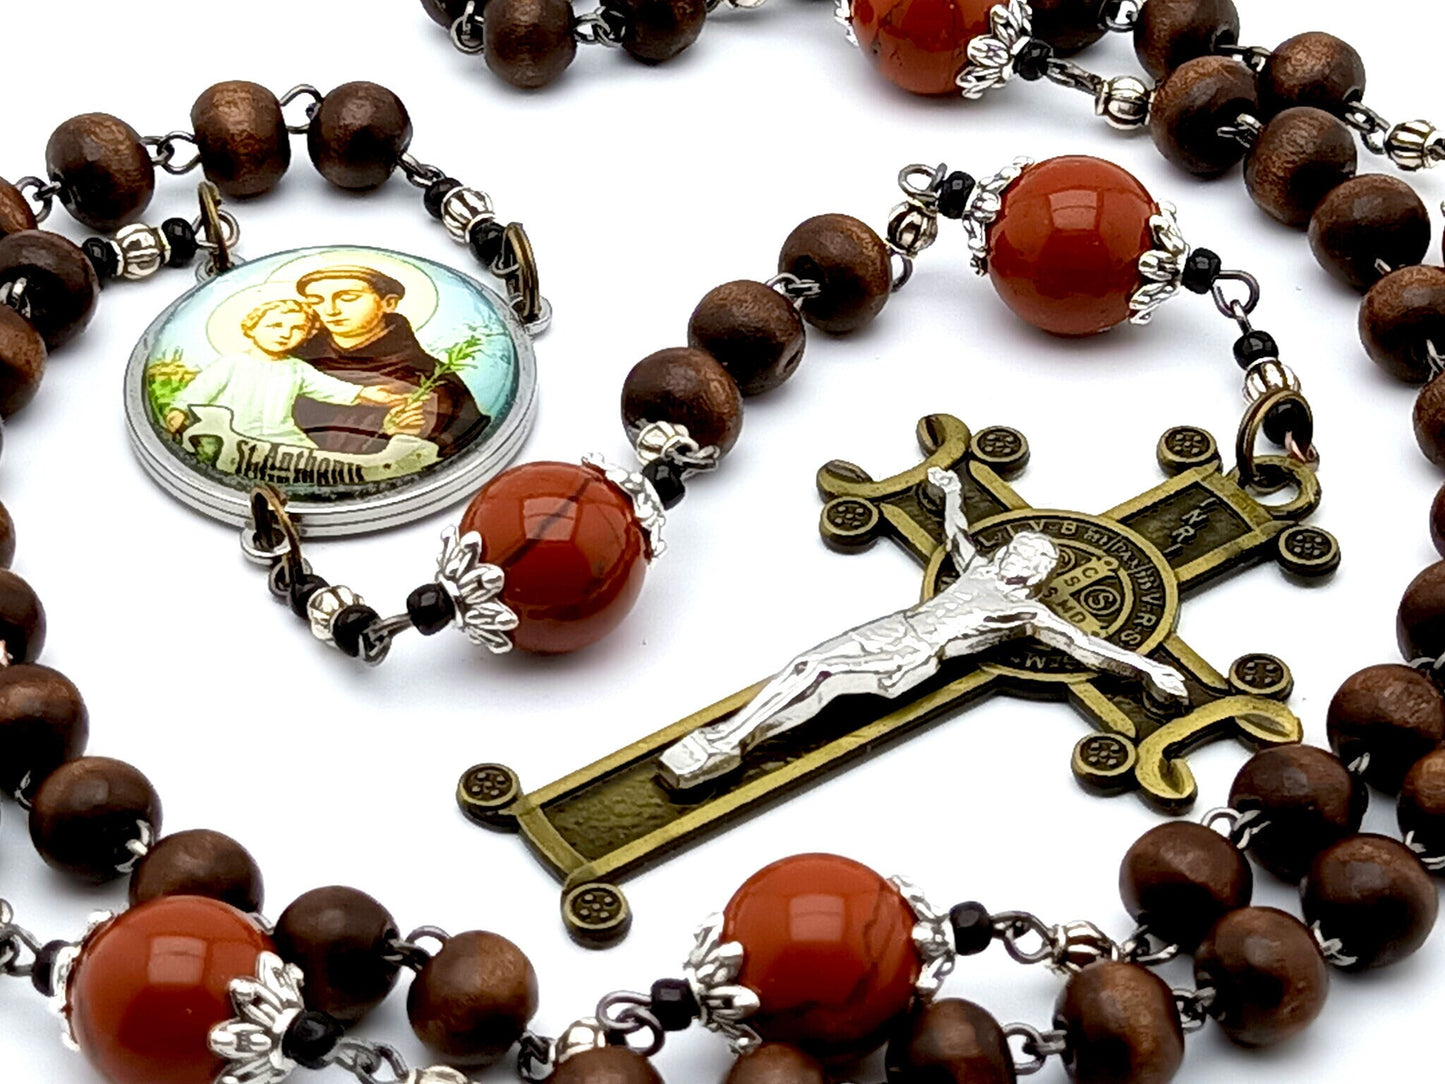 Saint Anthony of Padua unique rosary beads with dark wooden and gemstone beads, bronze crucifix and stainless steel picture centre medal..